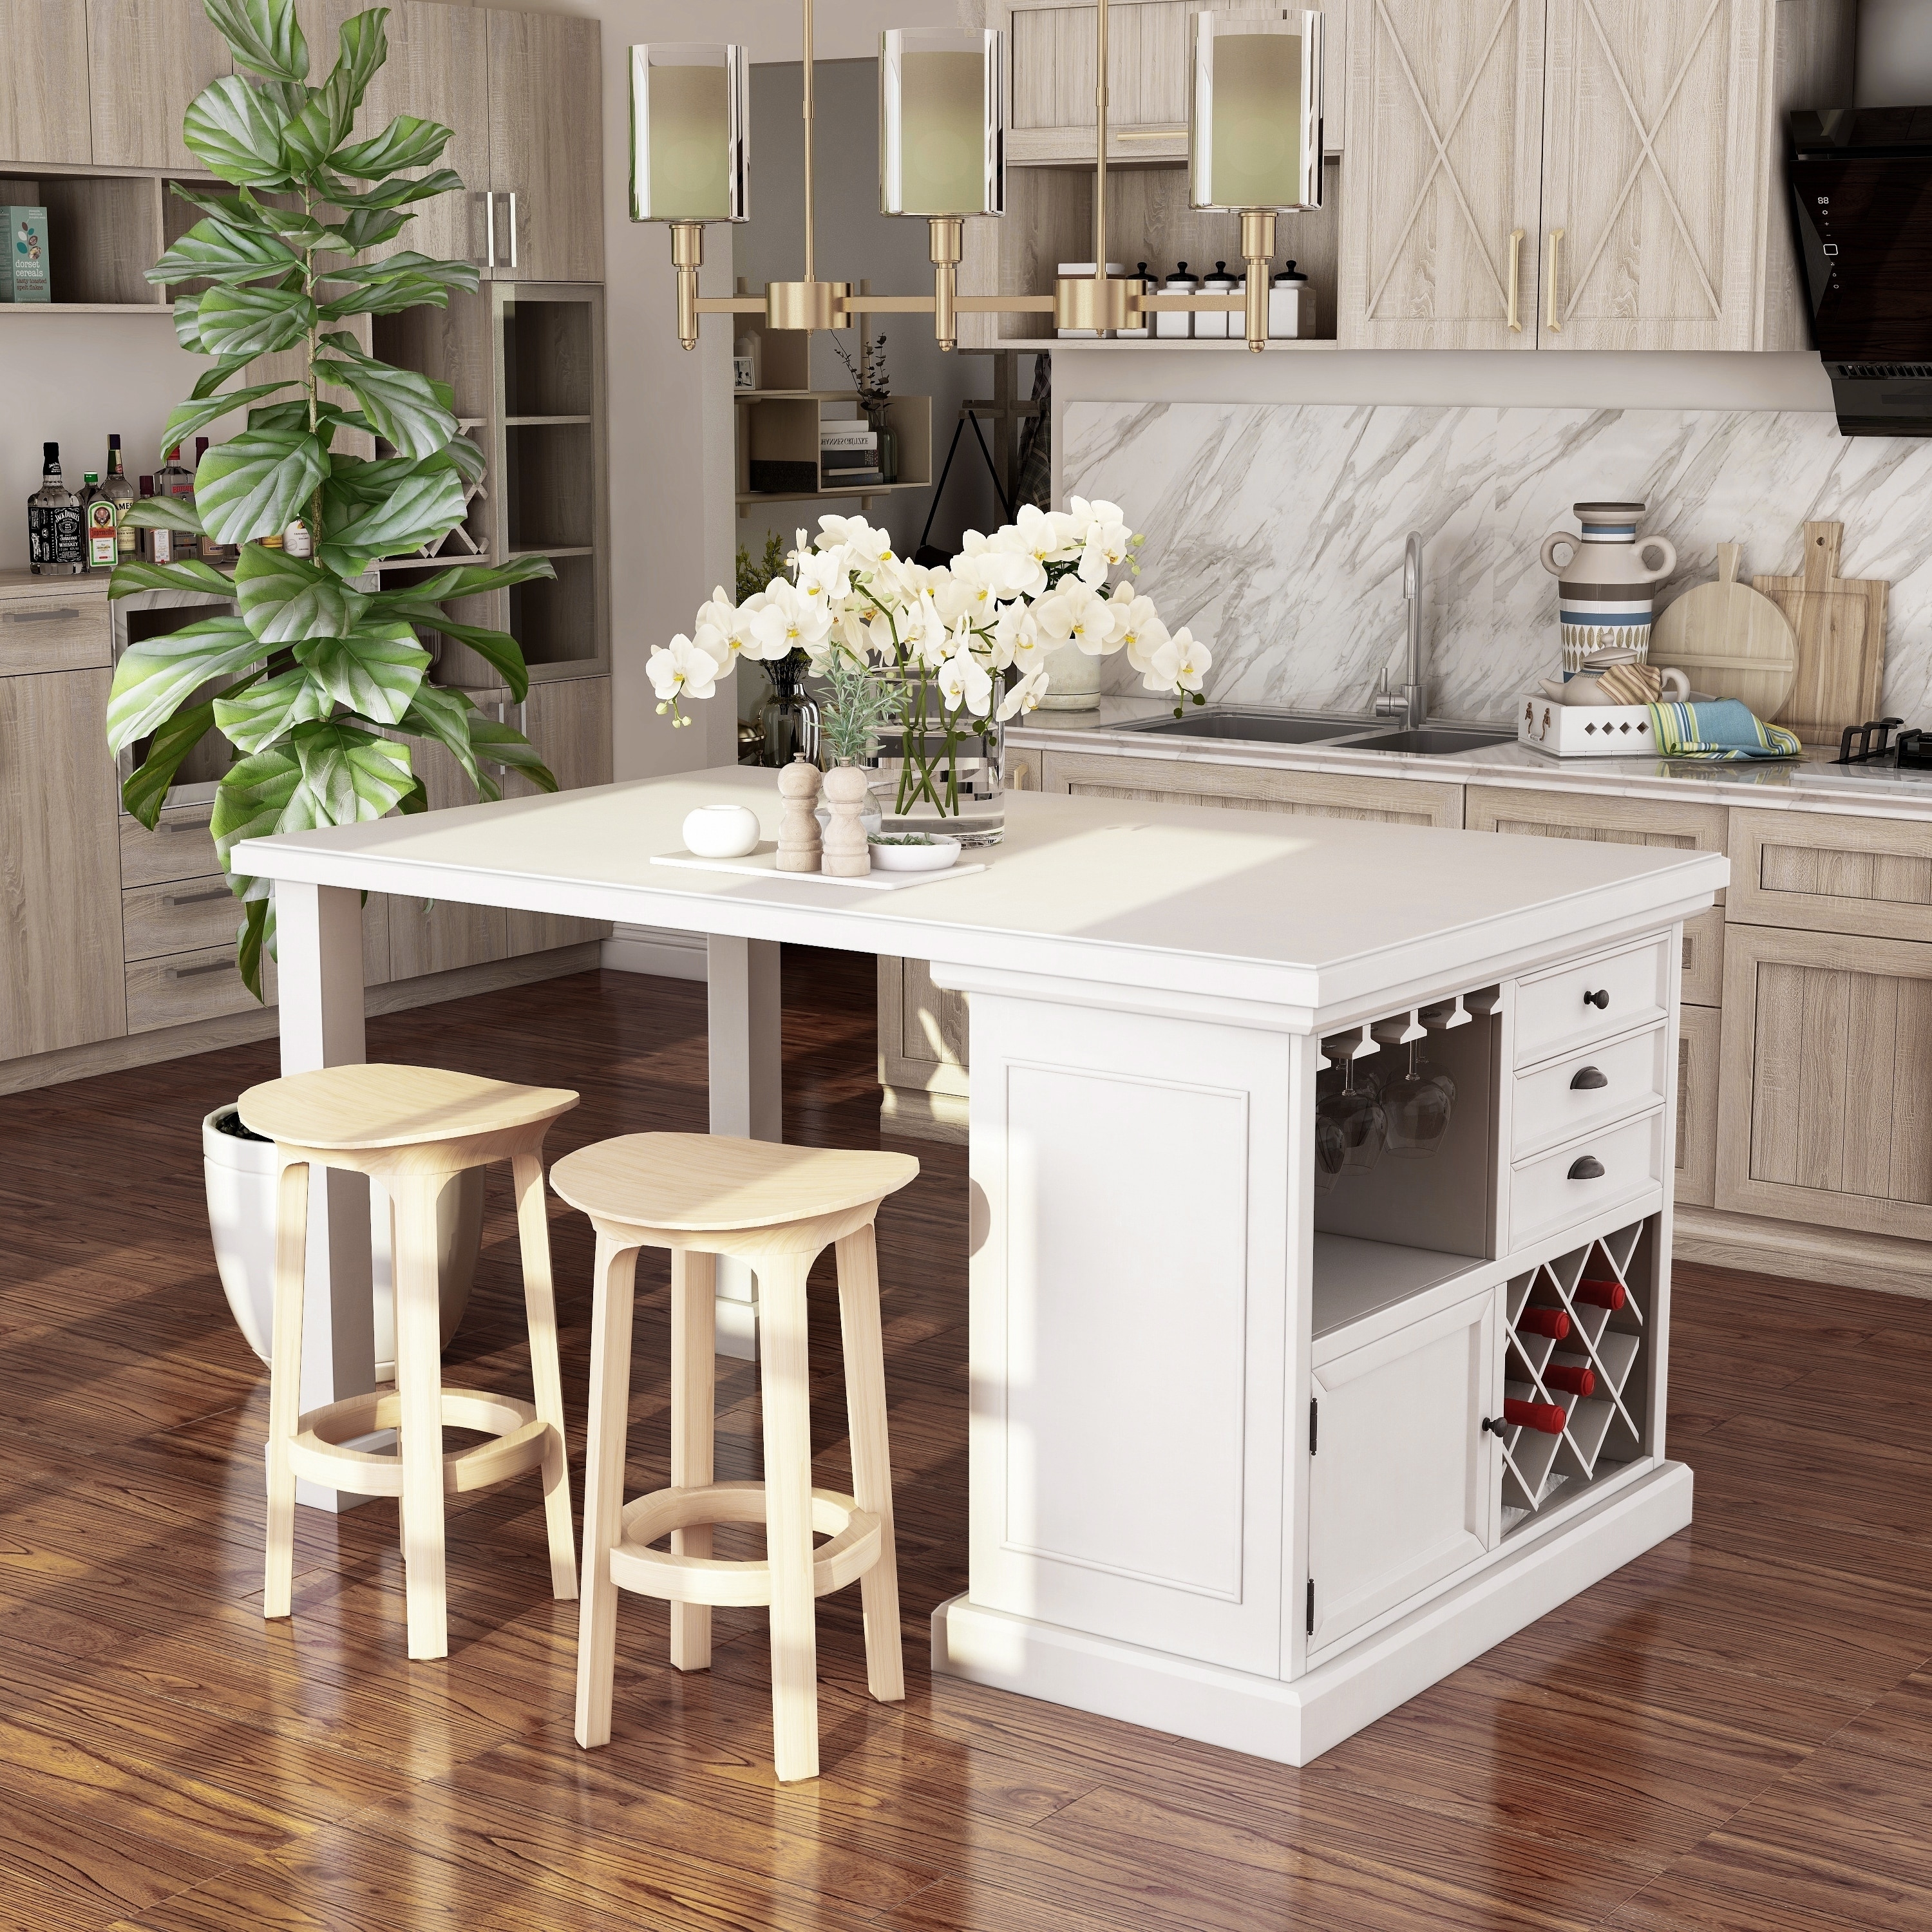 Furniture Of America Tia Transitional White 66 Inch Kitchen Island On Sale Overstock 20331449